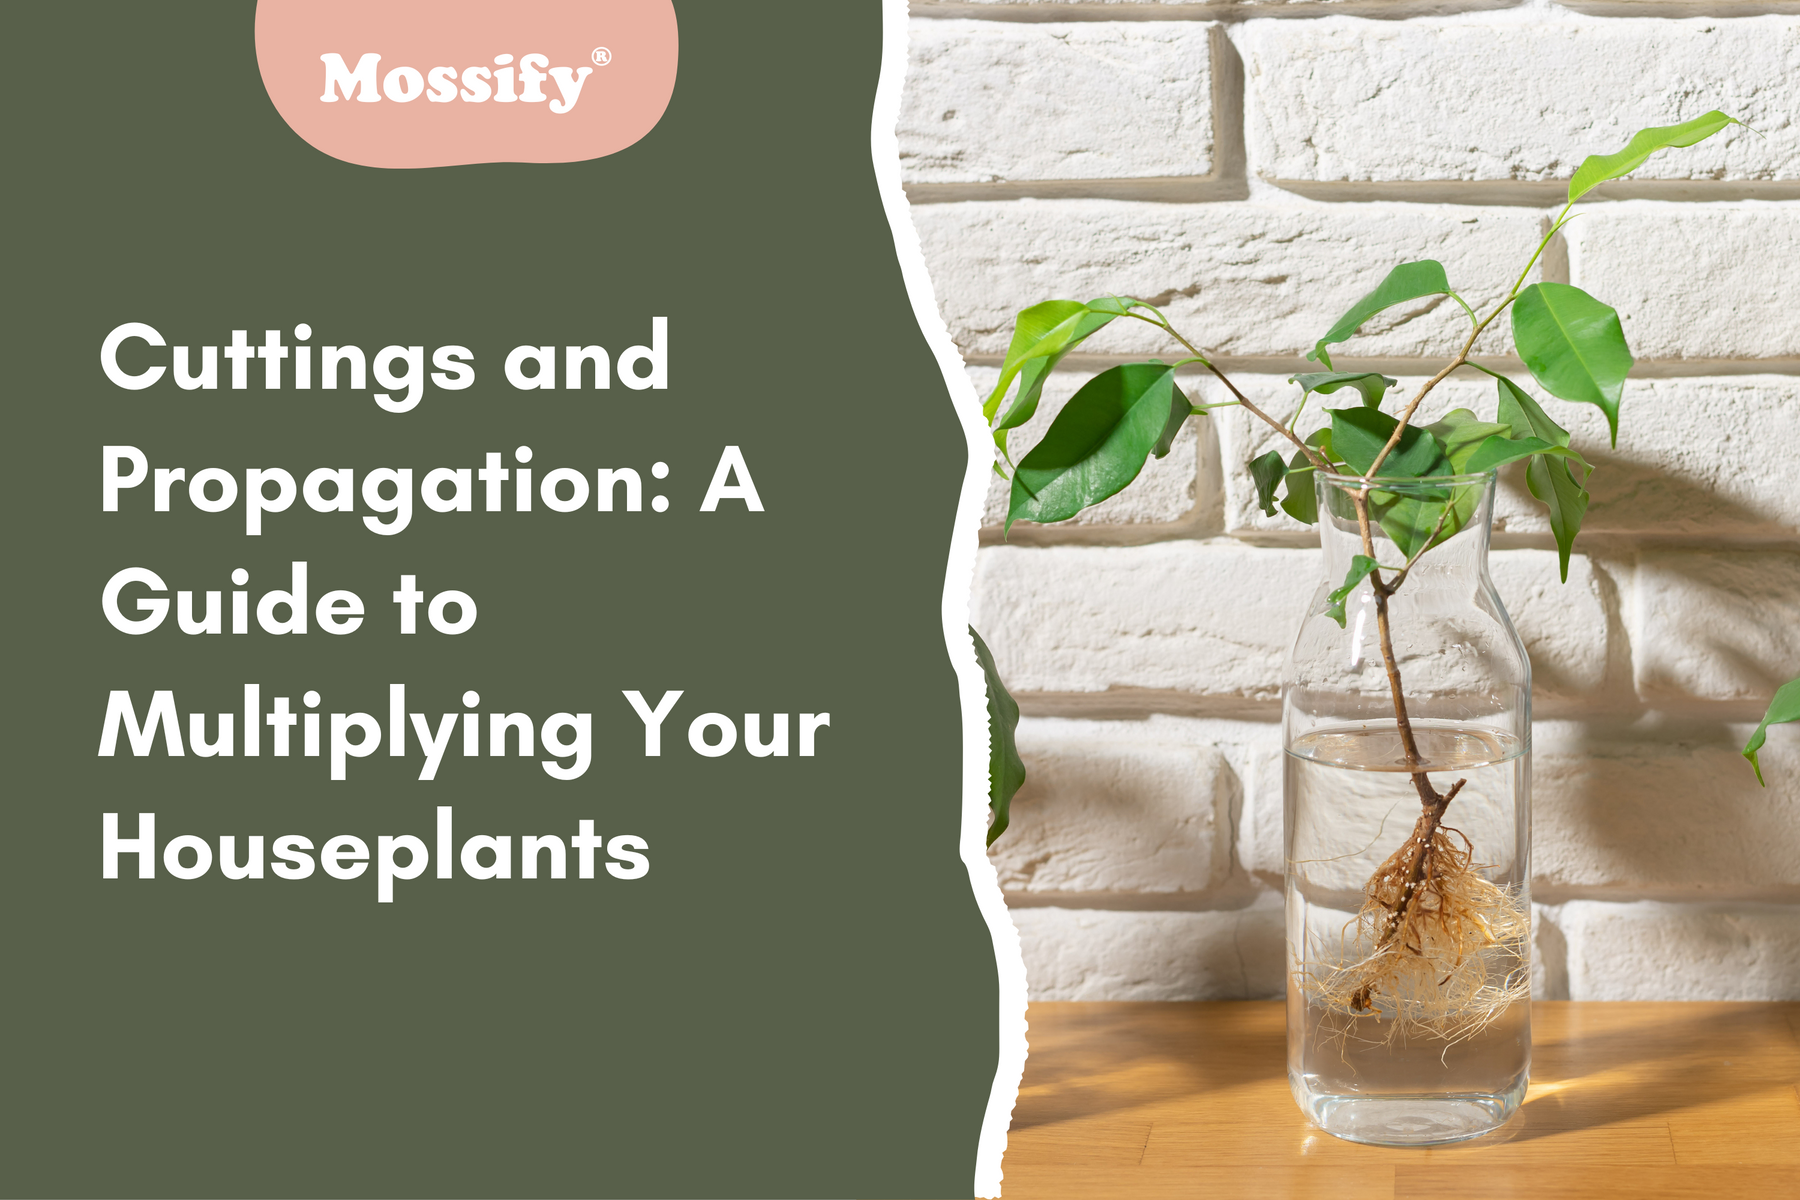 Cuttings and Propagation: A Guide to Multiplying Your Houseplants